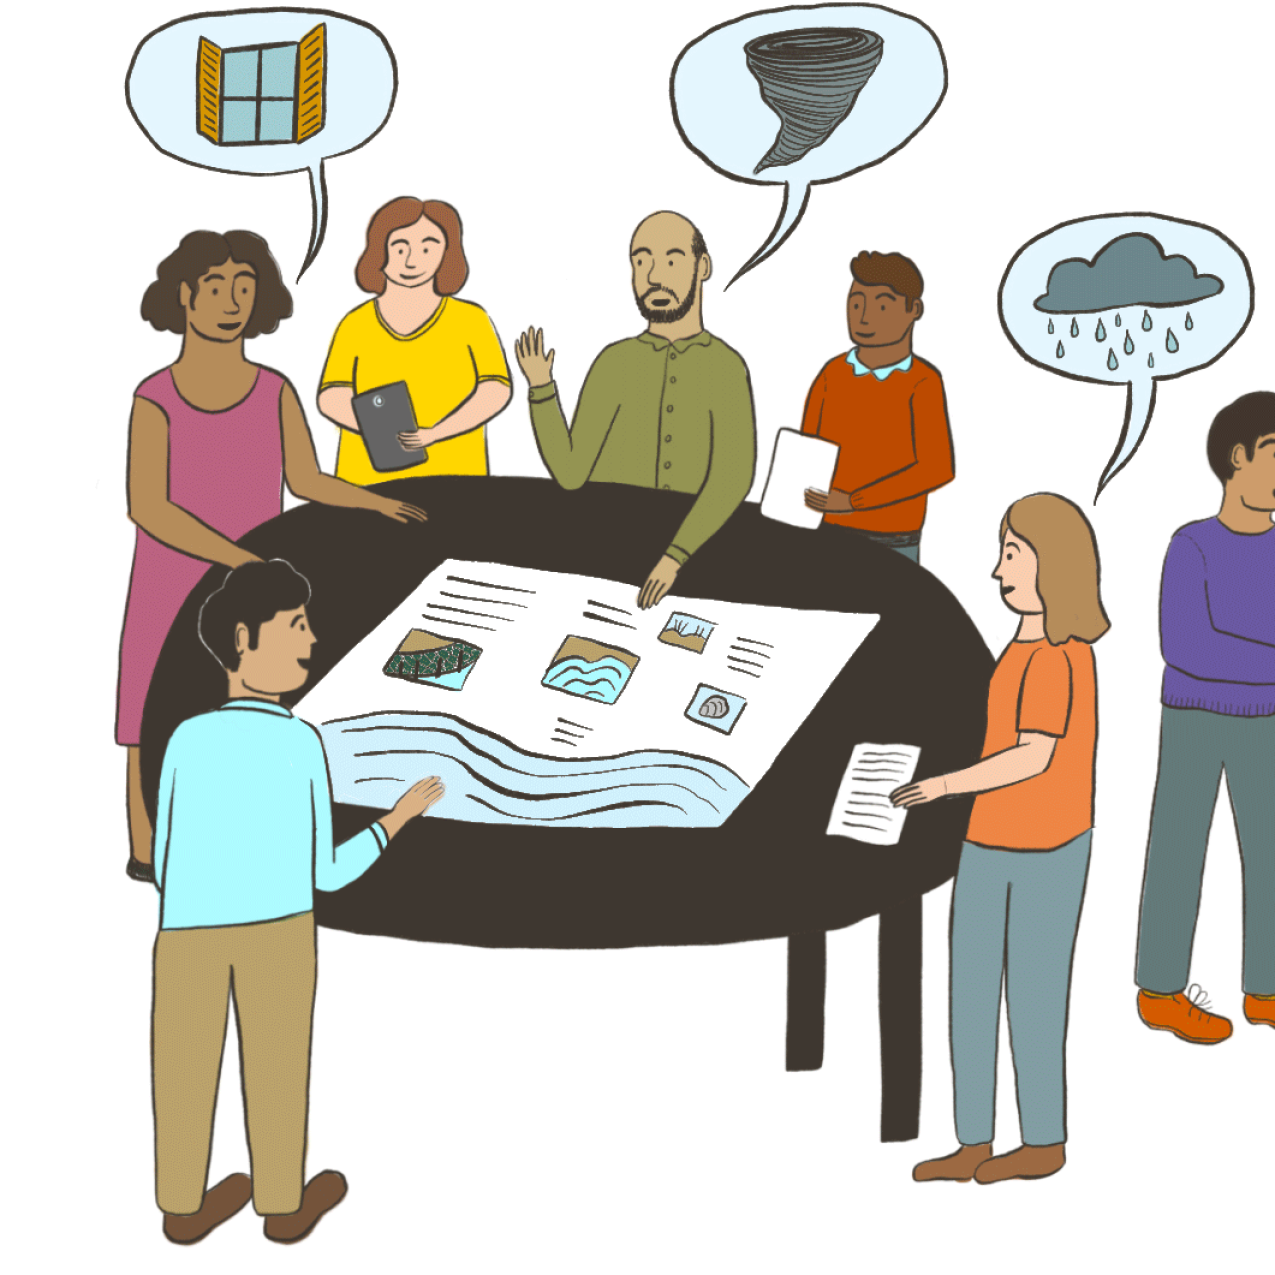 Cartoon illustration of community members discussing and collaborating on a schematic featuring maps and environmental information. Speech bubbles show that they are discussing storms, tornadoes, and storm shutters. Next to them, two people look at NOAA information on a laptop. 